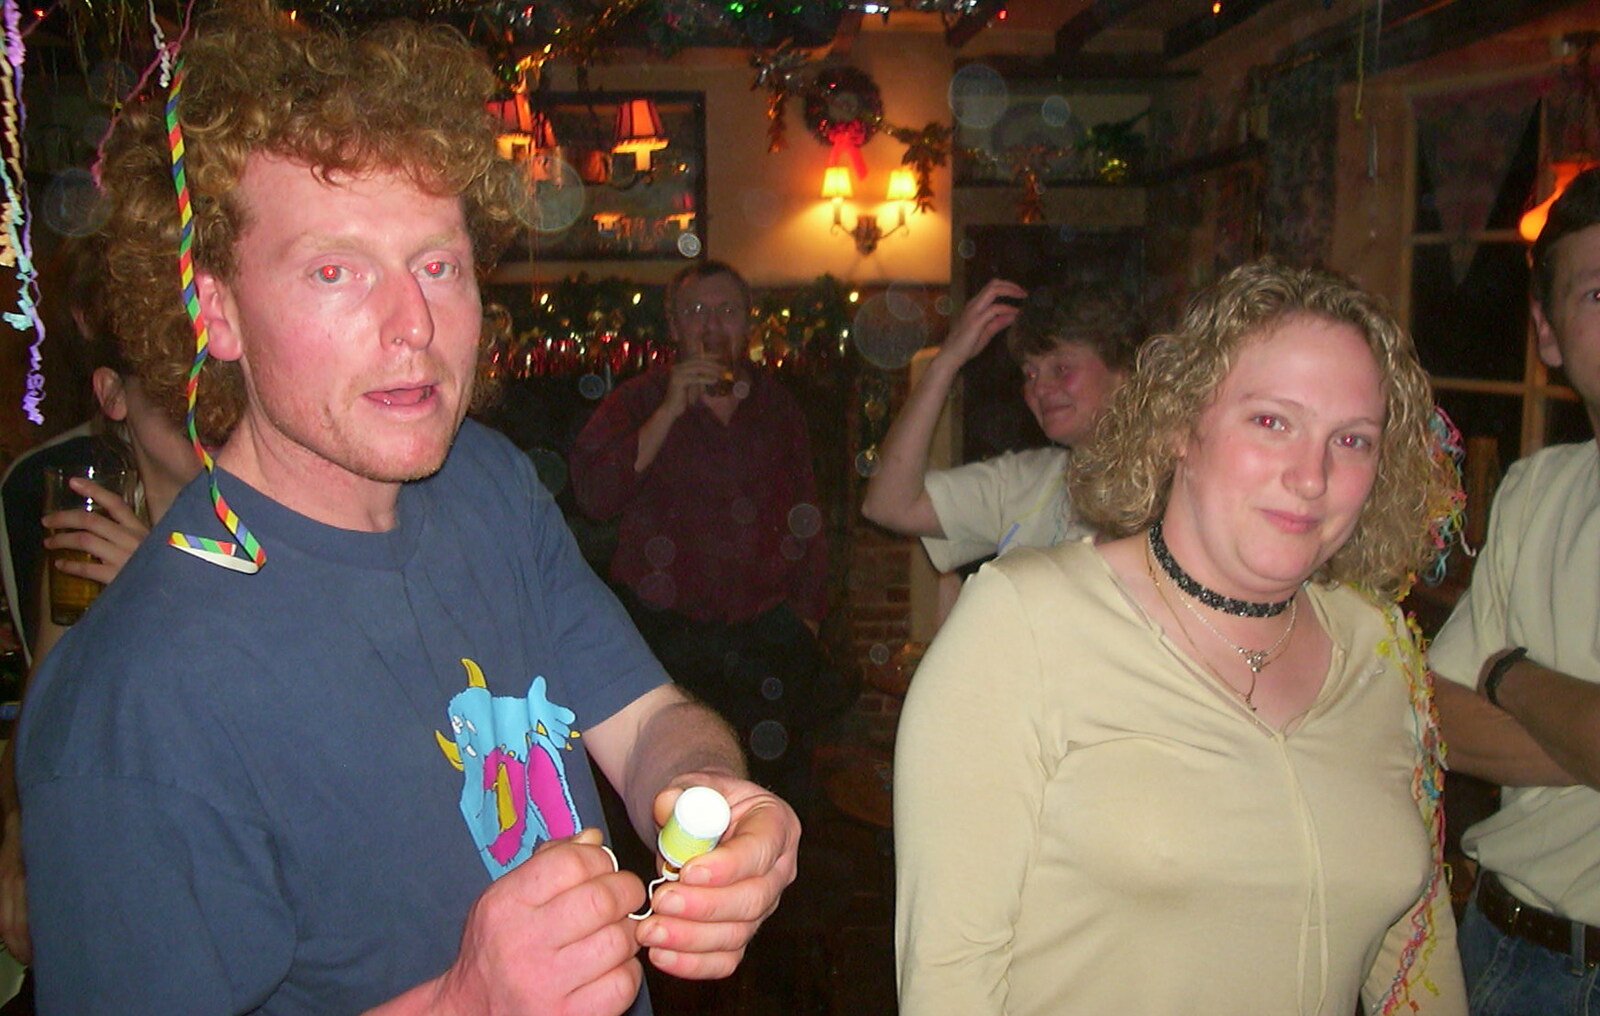 New Year's Eve at the Swan Inn, Brome, Suffolk - 31st December 2002: Wavy and Sally